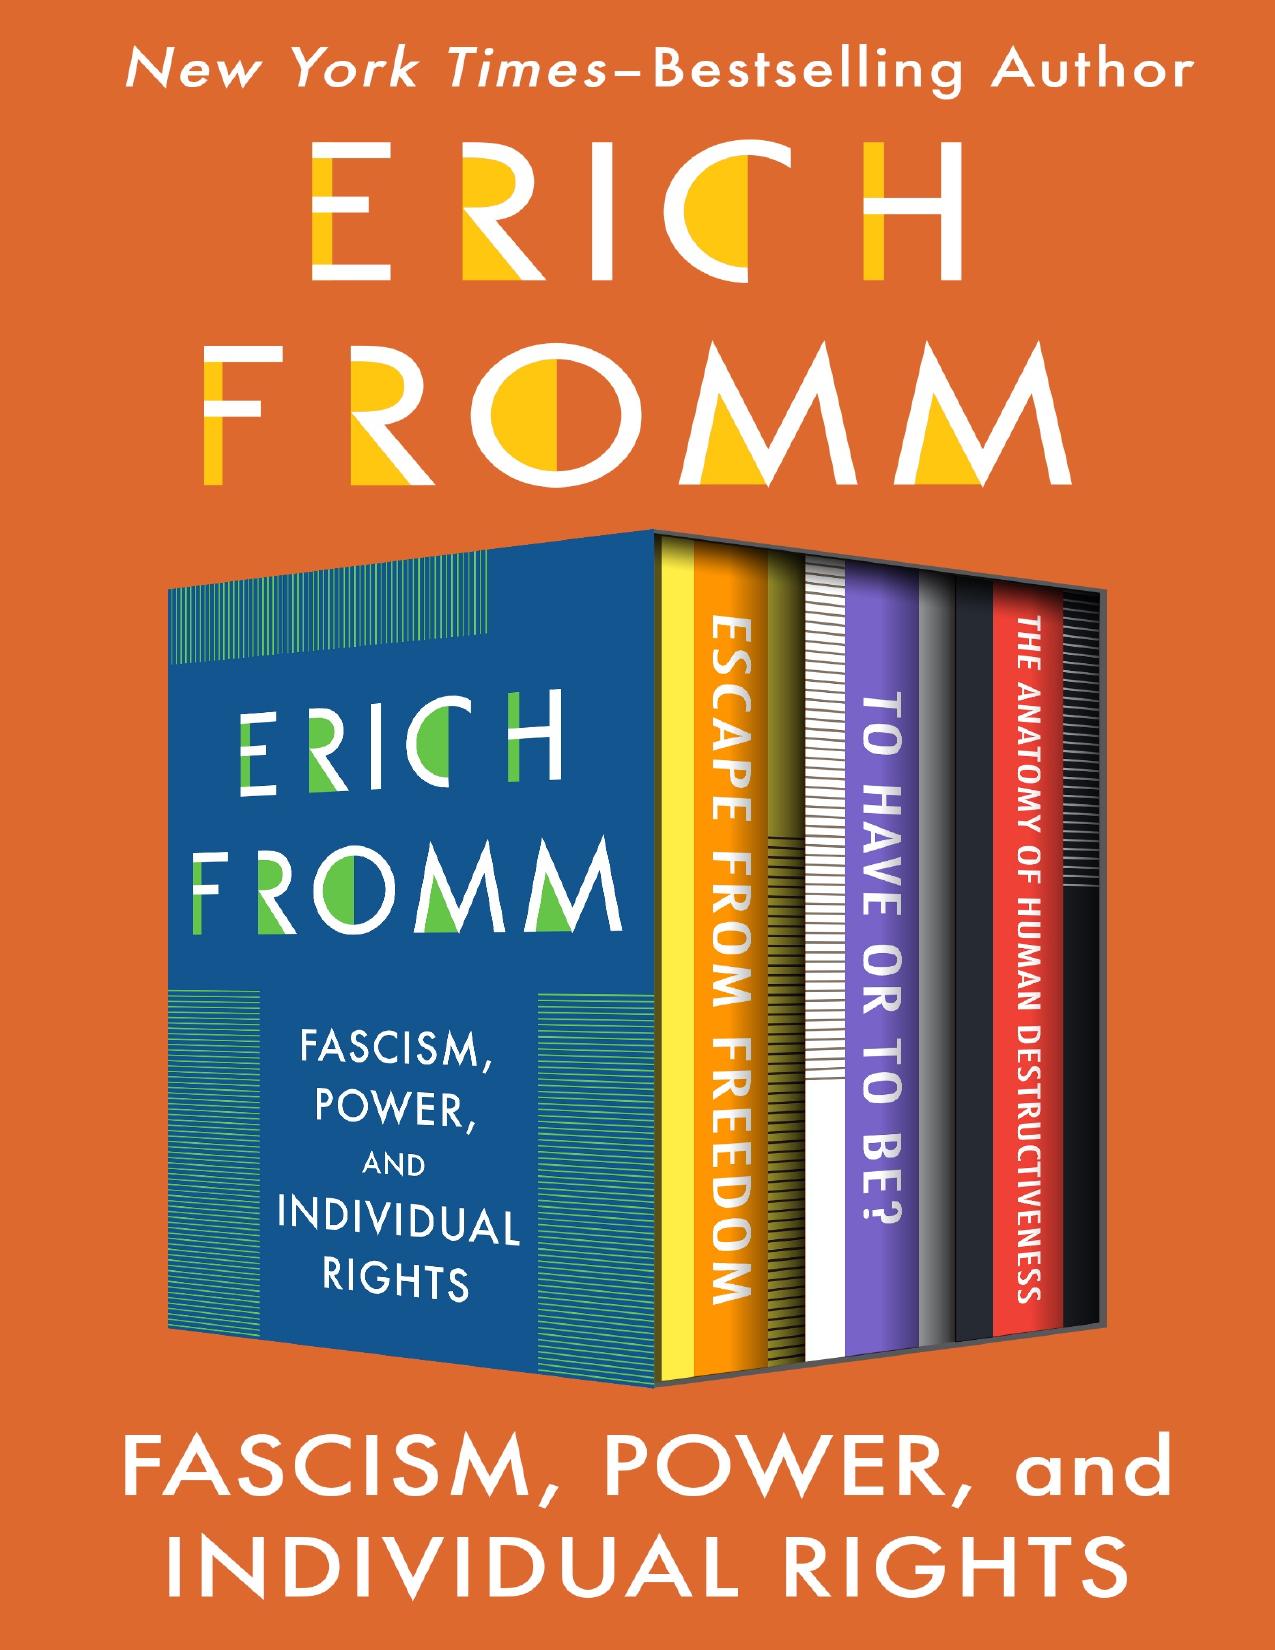 Fascism, Power, and Individual Rights: Escape From Freedom, to Have or to Be?, and the Anatomy of Human Destructiveness